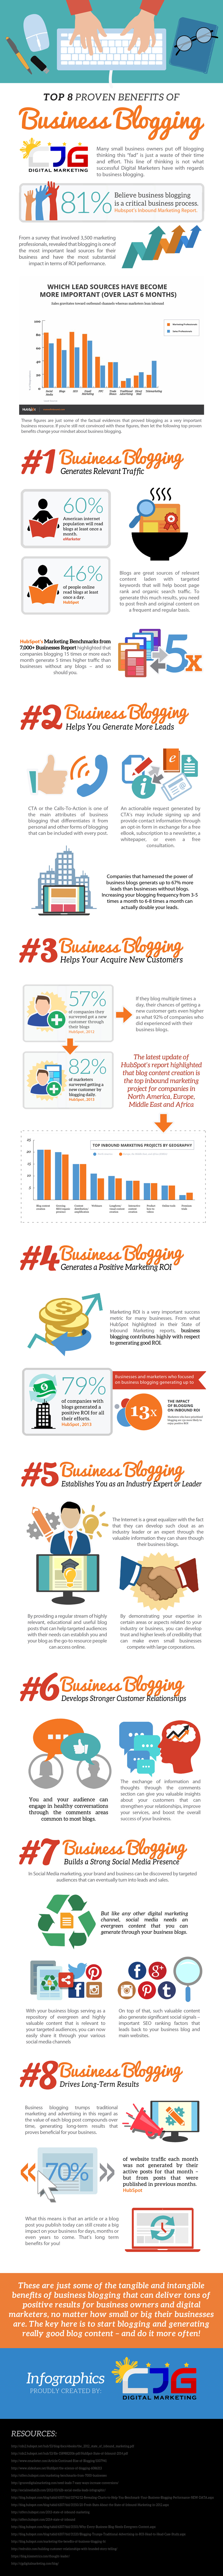 Top 8 Proven Benefits of Business Blogging (Infographic) - An Infographic from CJG Digital Marketing